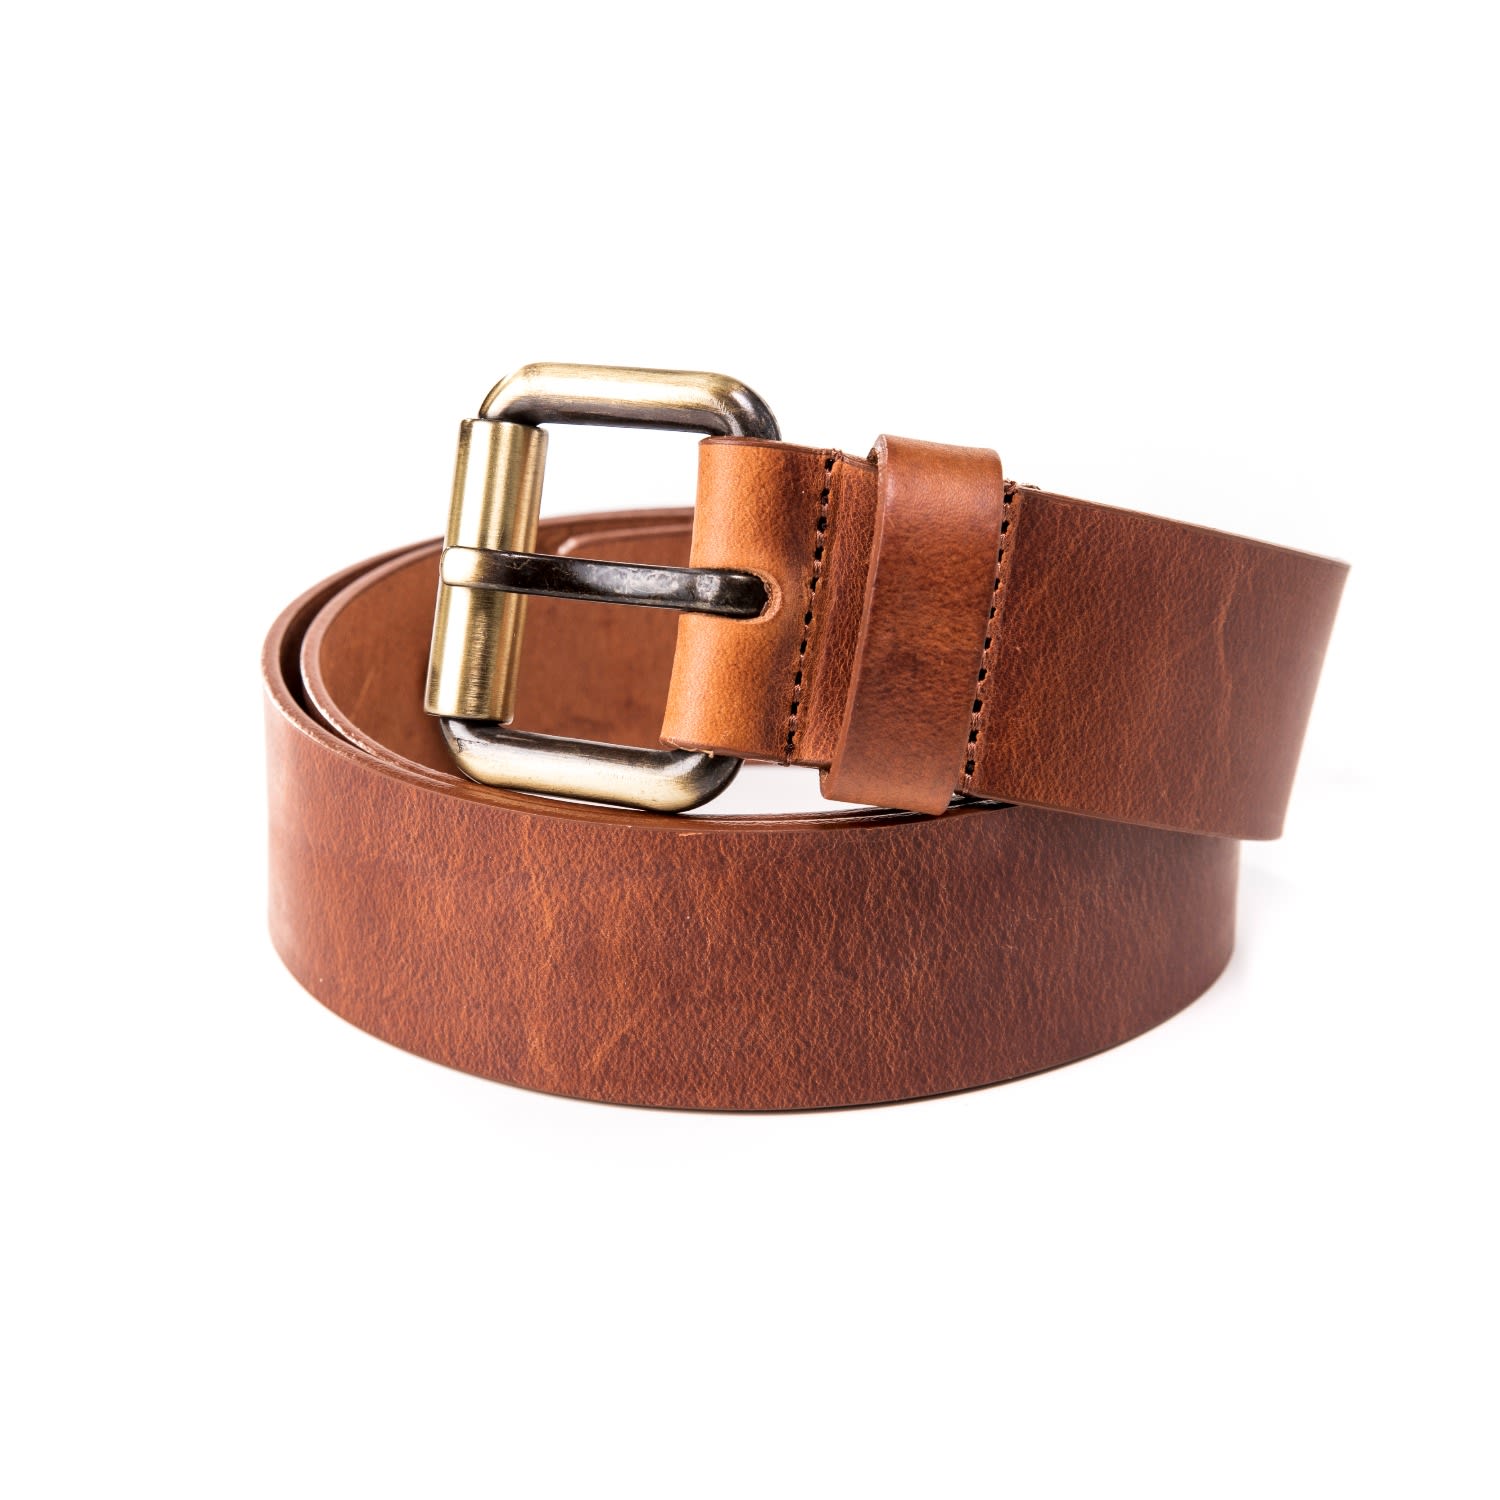 The Dust Company Men's Leather Belt Brown